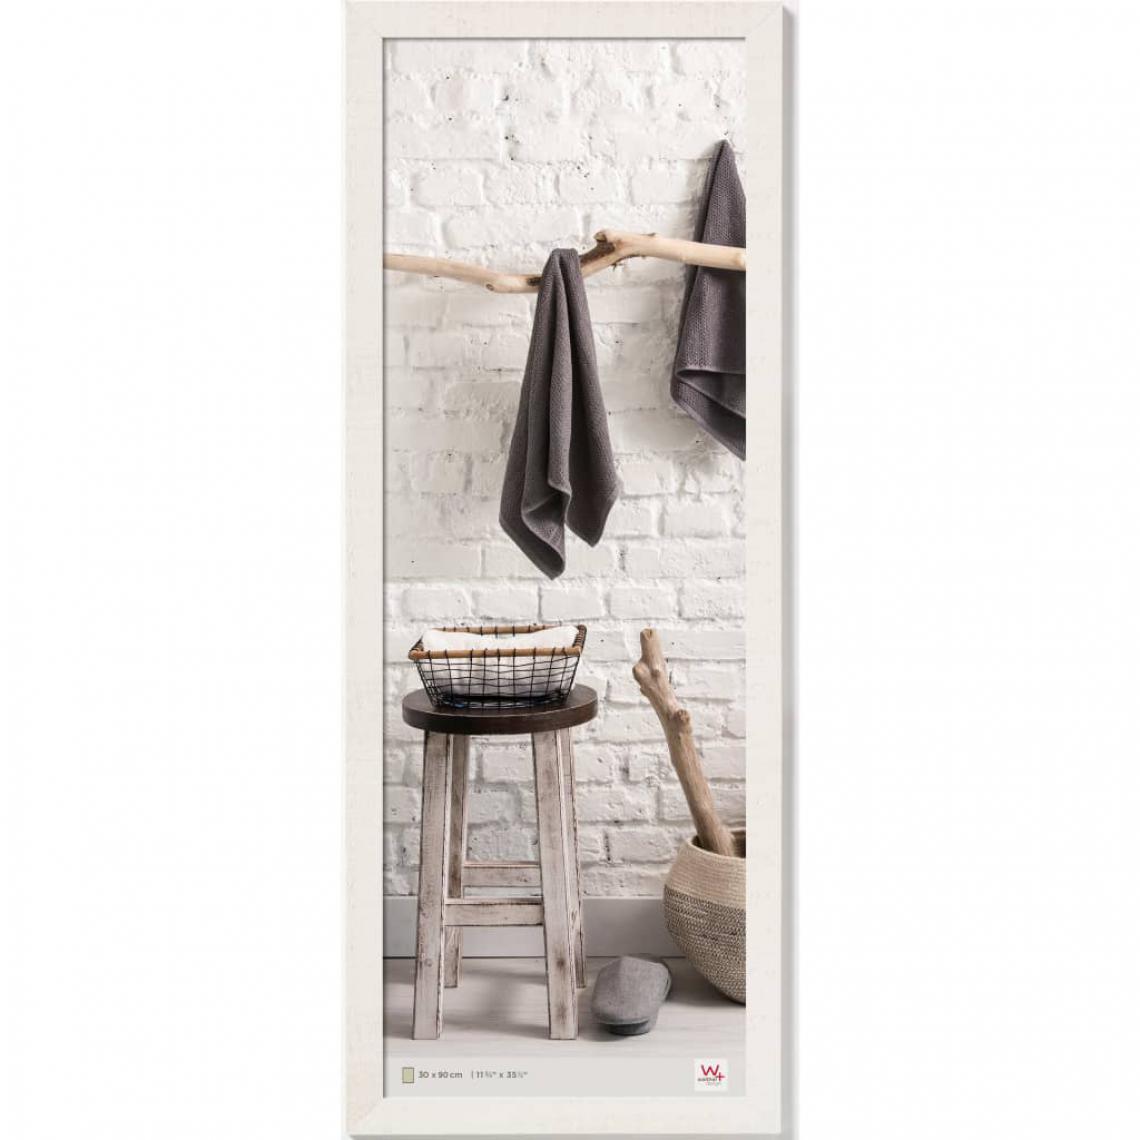 Walther - Walther Design Cadre photo Home 30x90 cm Blanc polaire - Cadres, pêle-mêle